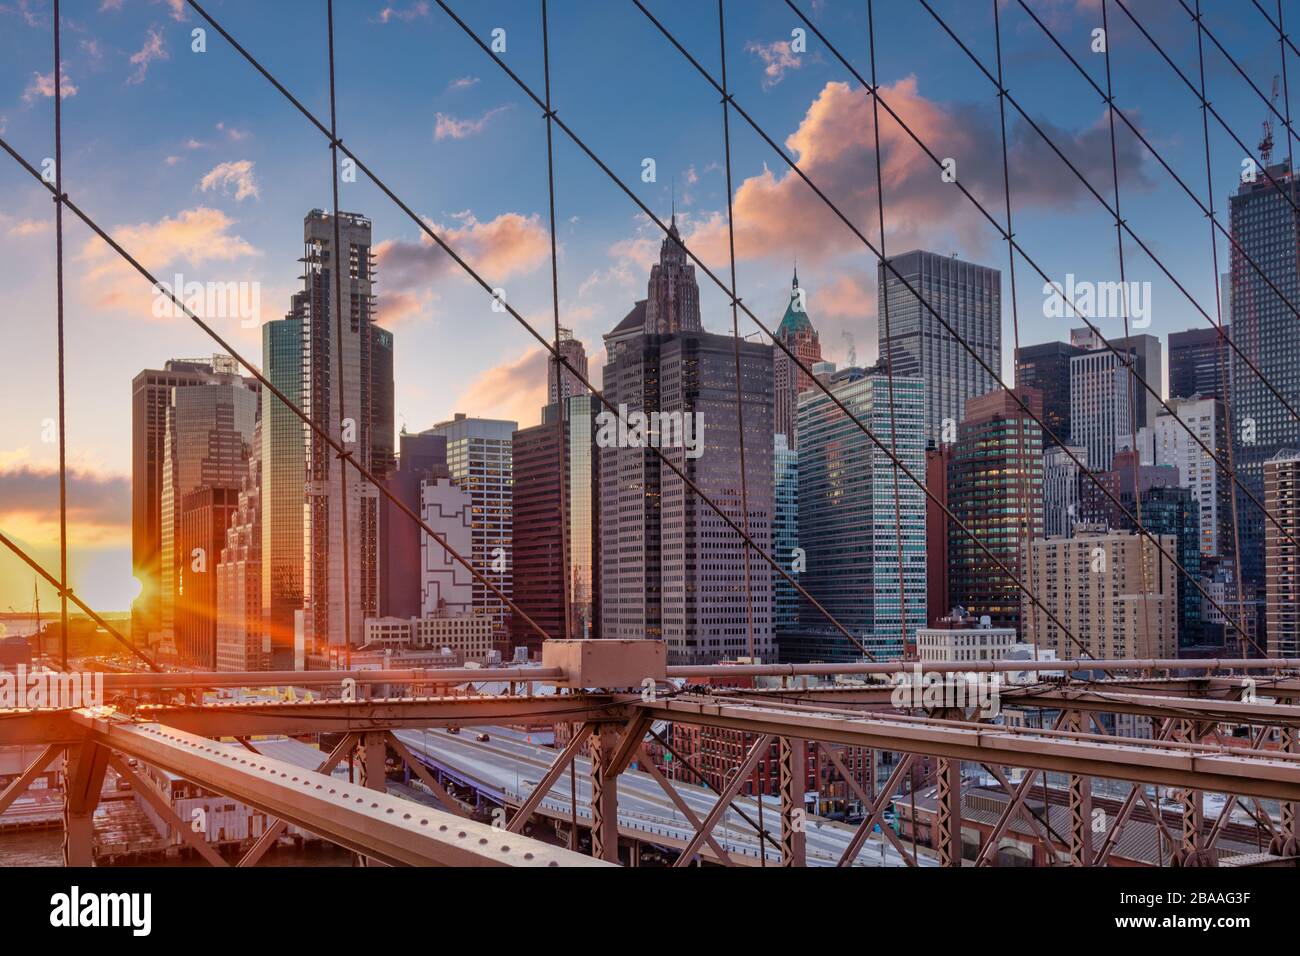 New York skyline from Brooklyn Bridge at sunset in Winter with clouds in the sky in background Stock Photo